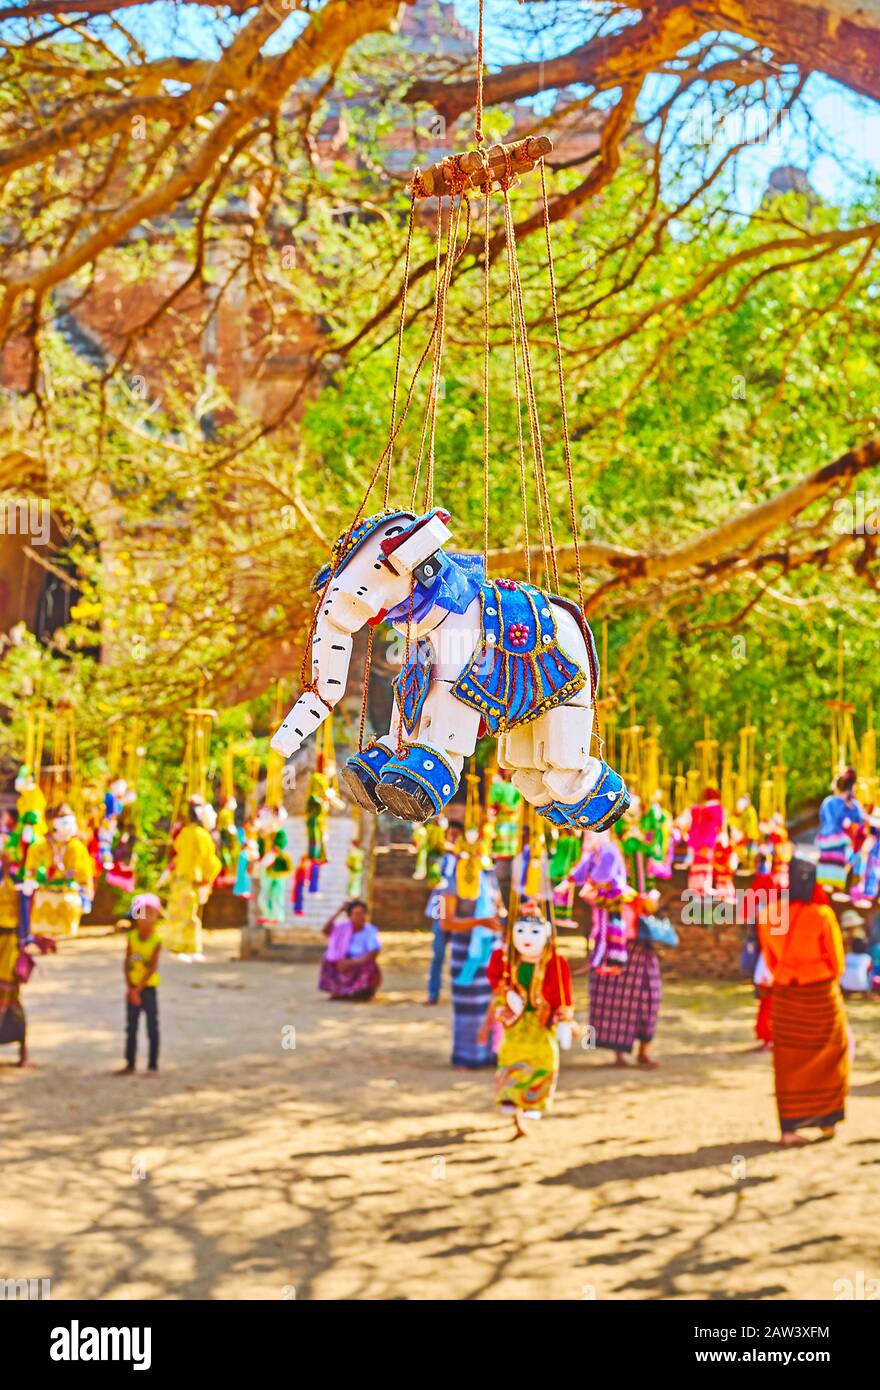 The colorful wooden string puppet in shape of elephant in outdoor stall of Dhammayangyi Temple market, Bagan, Myanmar Stock Photo